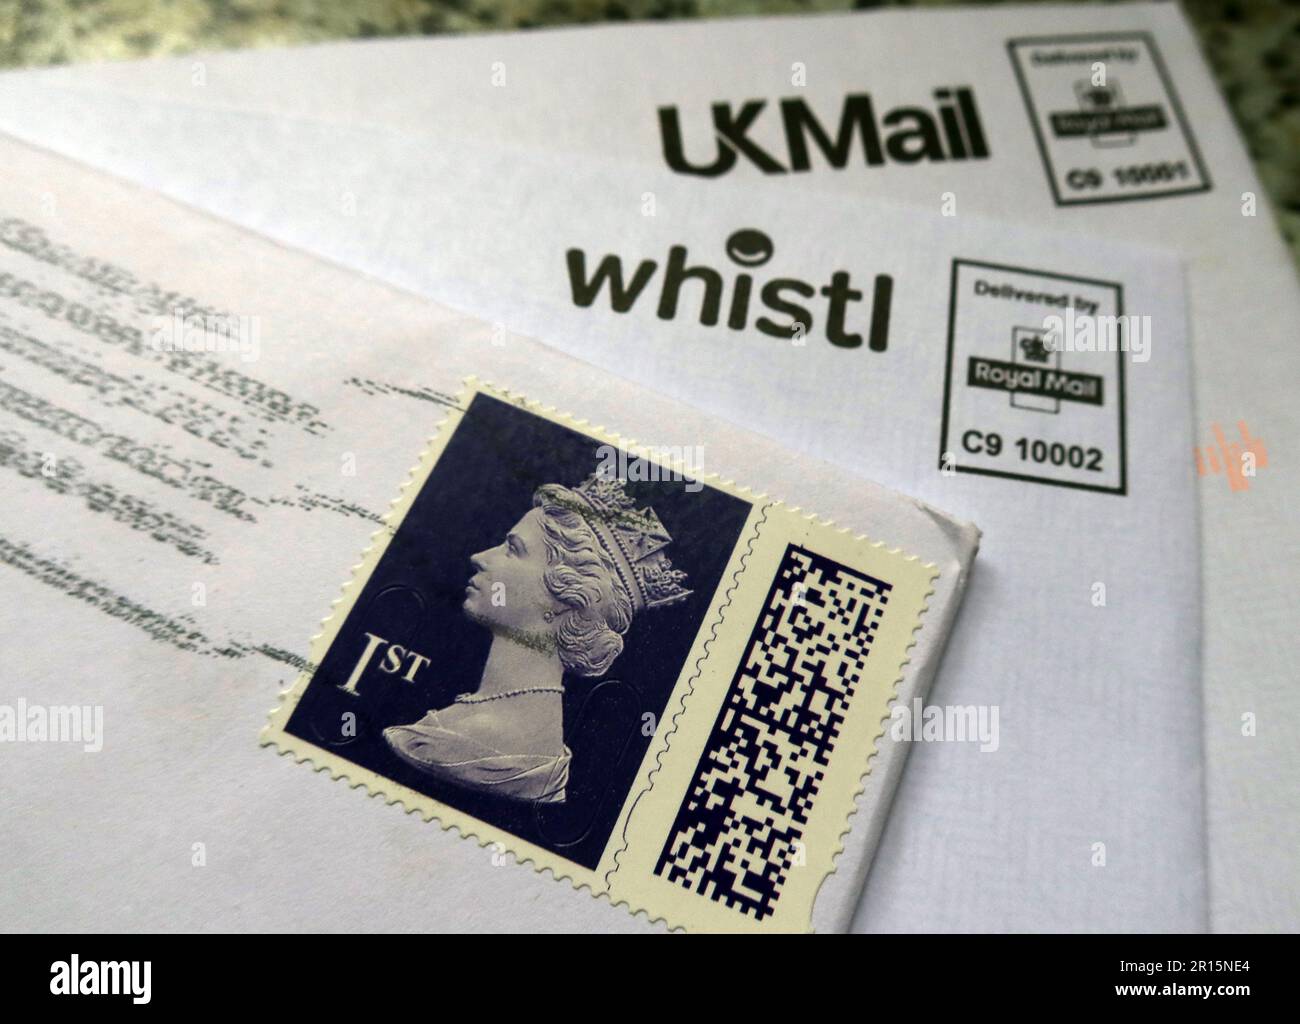 New 1st class Royal Mail barcoded stamps in the UK, Queen Elizabeth II - UKMail & Whistl Stock Photo